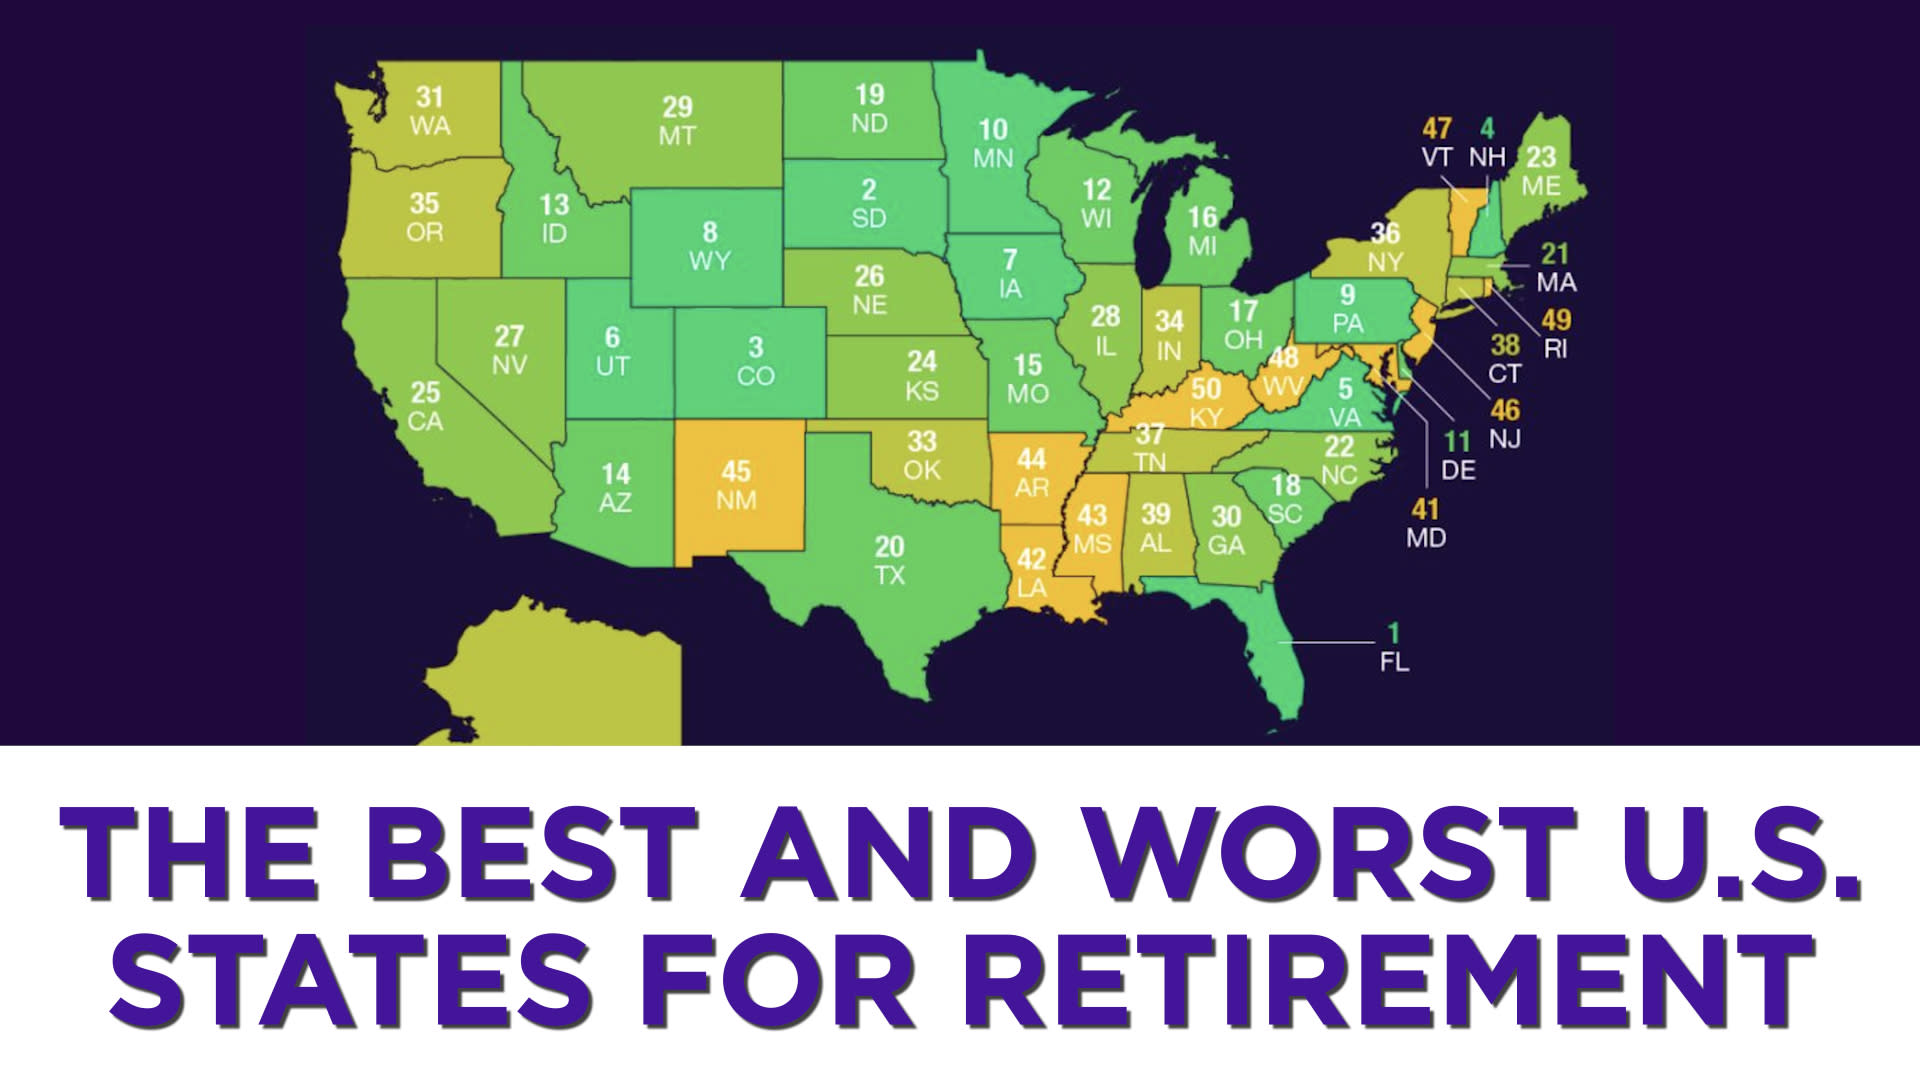 The best and worst U.S. states for retirement [Video]